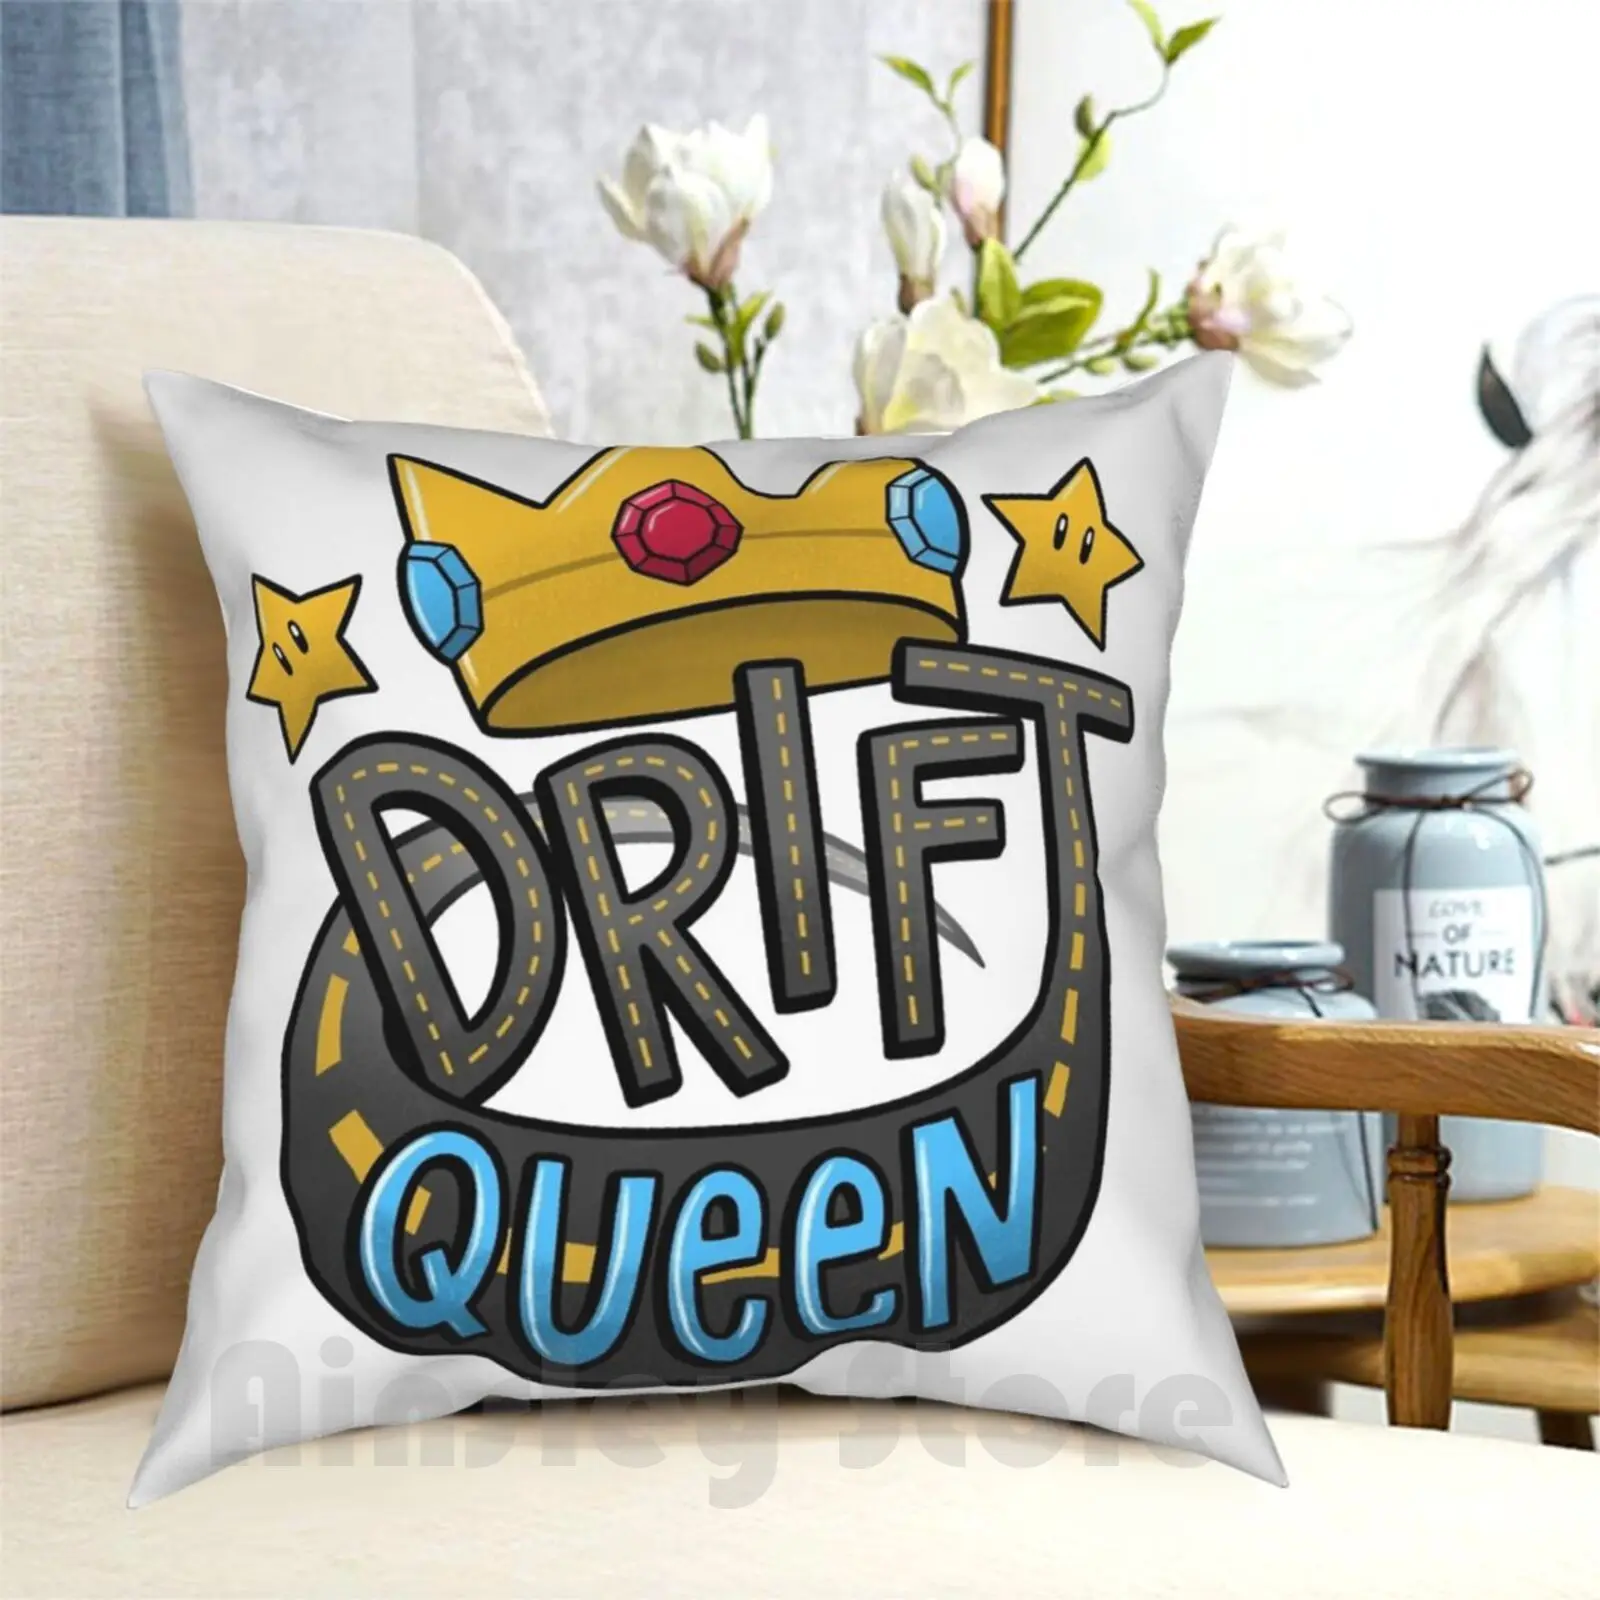 Drift Queen Pillow Case Printed Home Soft DIY Pillow cover Game Gaming Geek Kart Shell Wii Switch Nintendo 3Ds Funny Random